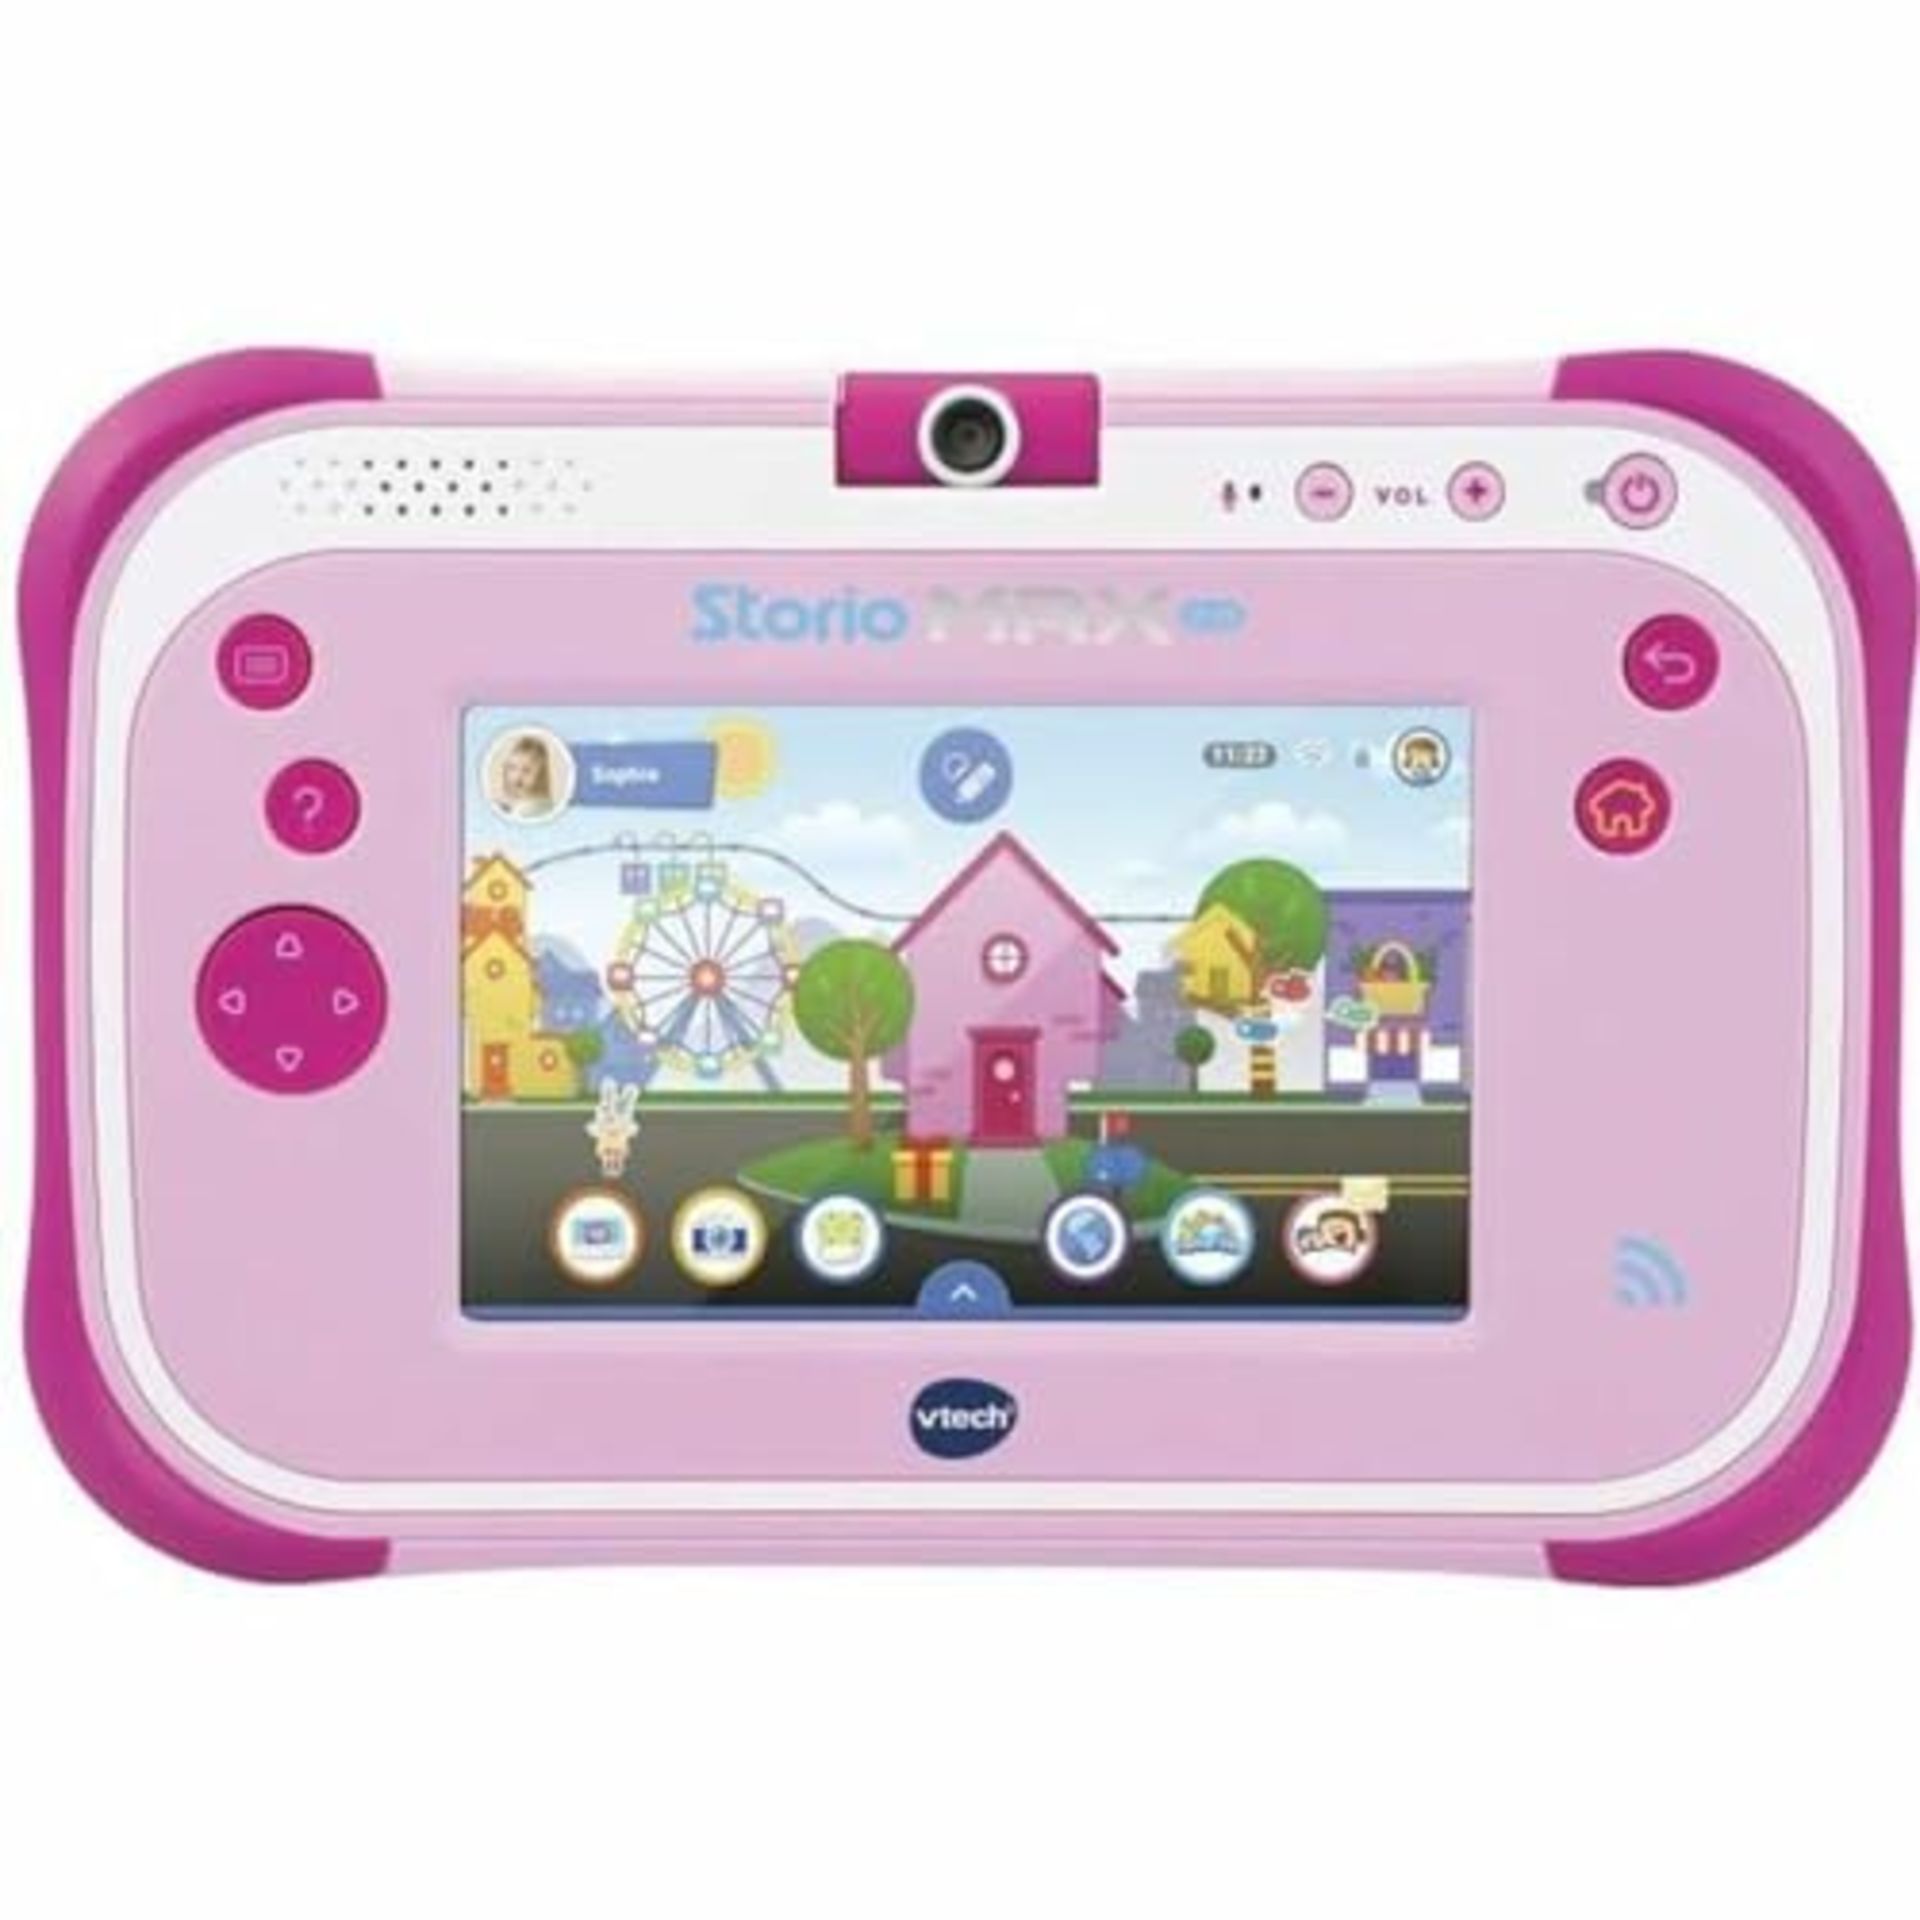 RRP £99.00 Vtech - 108855 - Tablet Storio Max 2.0 - 5 inch - Pink French version